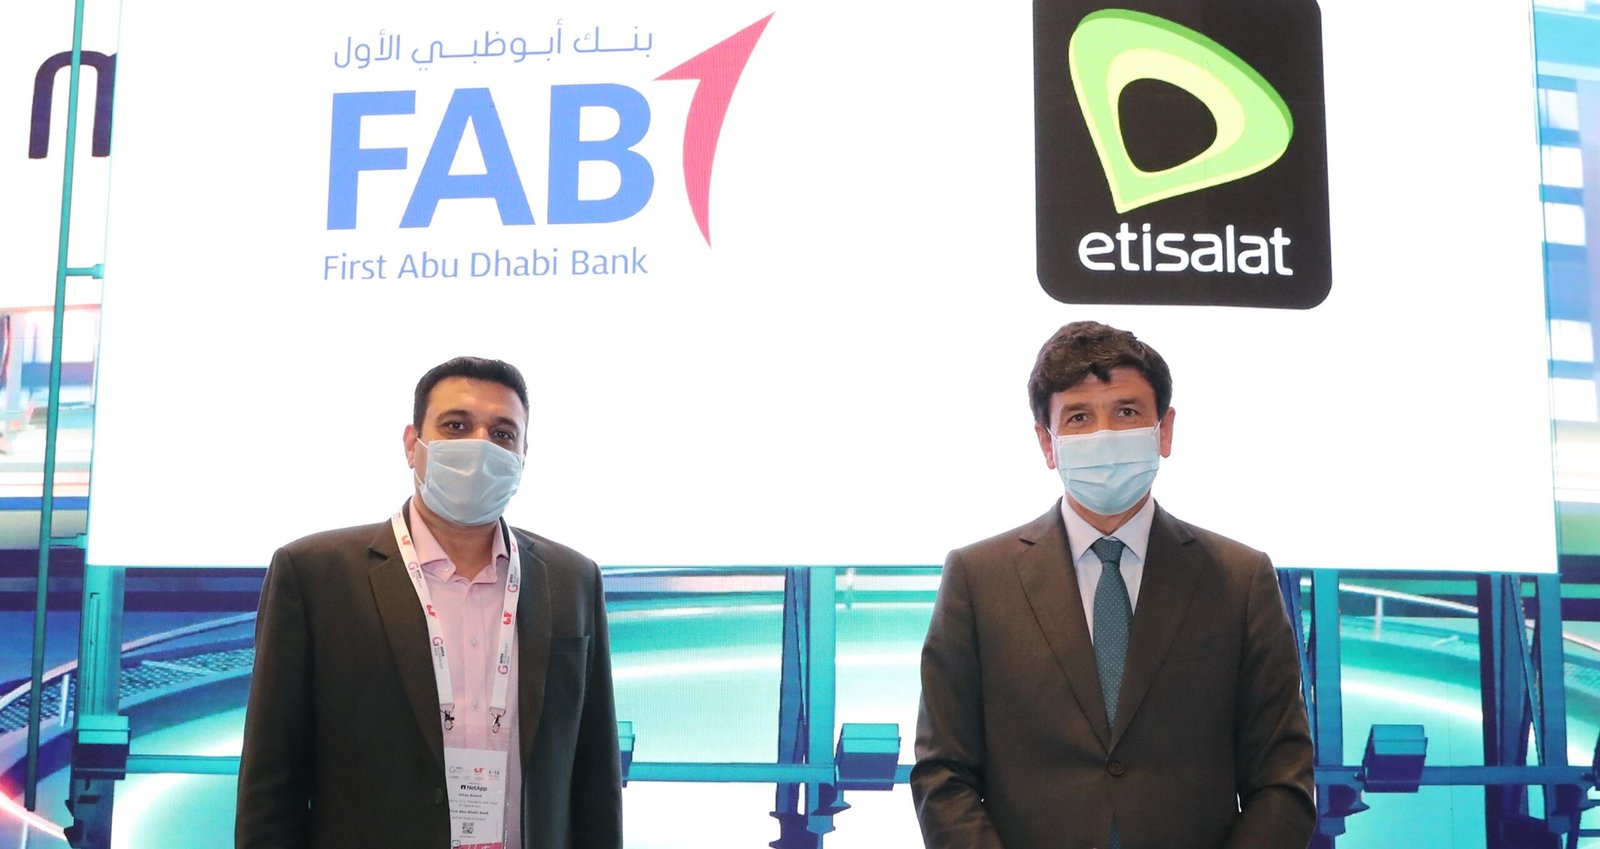 Etisalat Digital and FAB collaborate to deploy Smart Building IoT solution